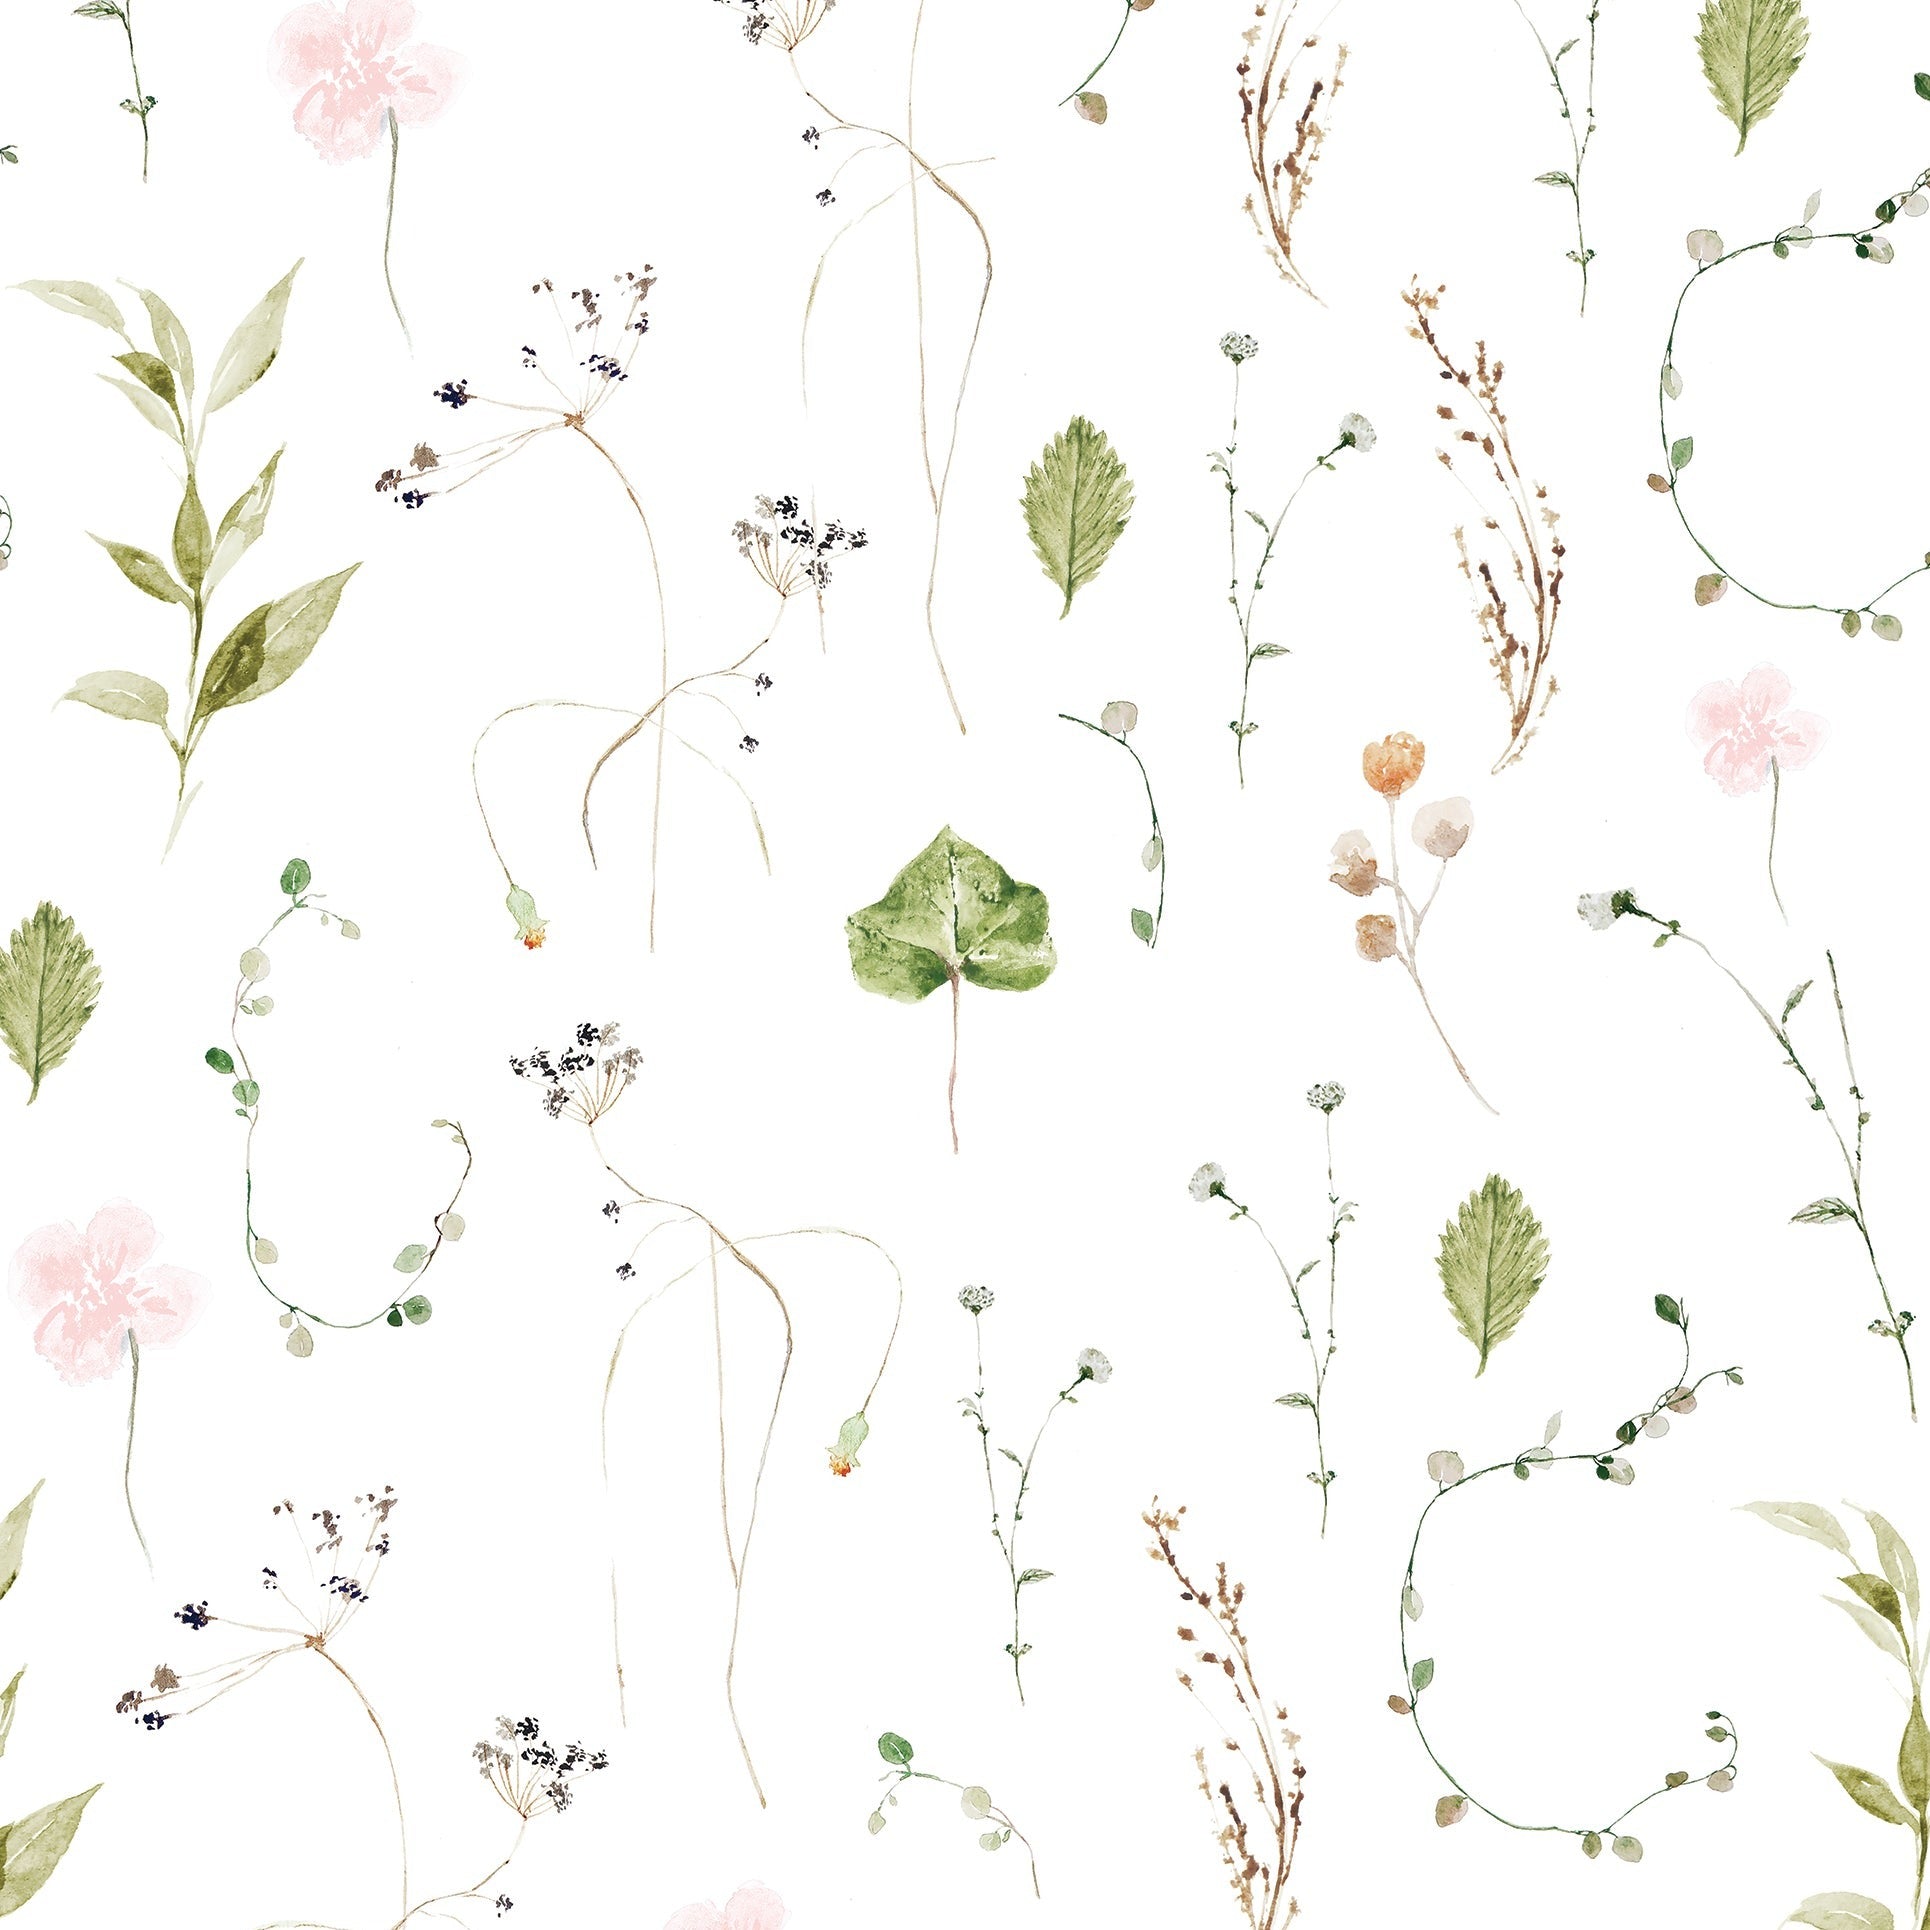 wallpaper, peel and stick wallpaper, Home decor, floral wallpaper, watercolor floral wallpaper, bedroom wallpaper, green wallpaper, pink wallpaper, ikebana wallpapers,